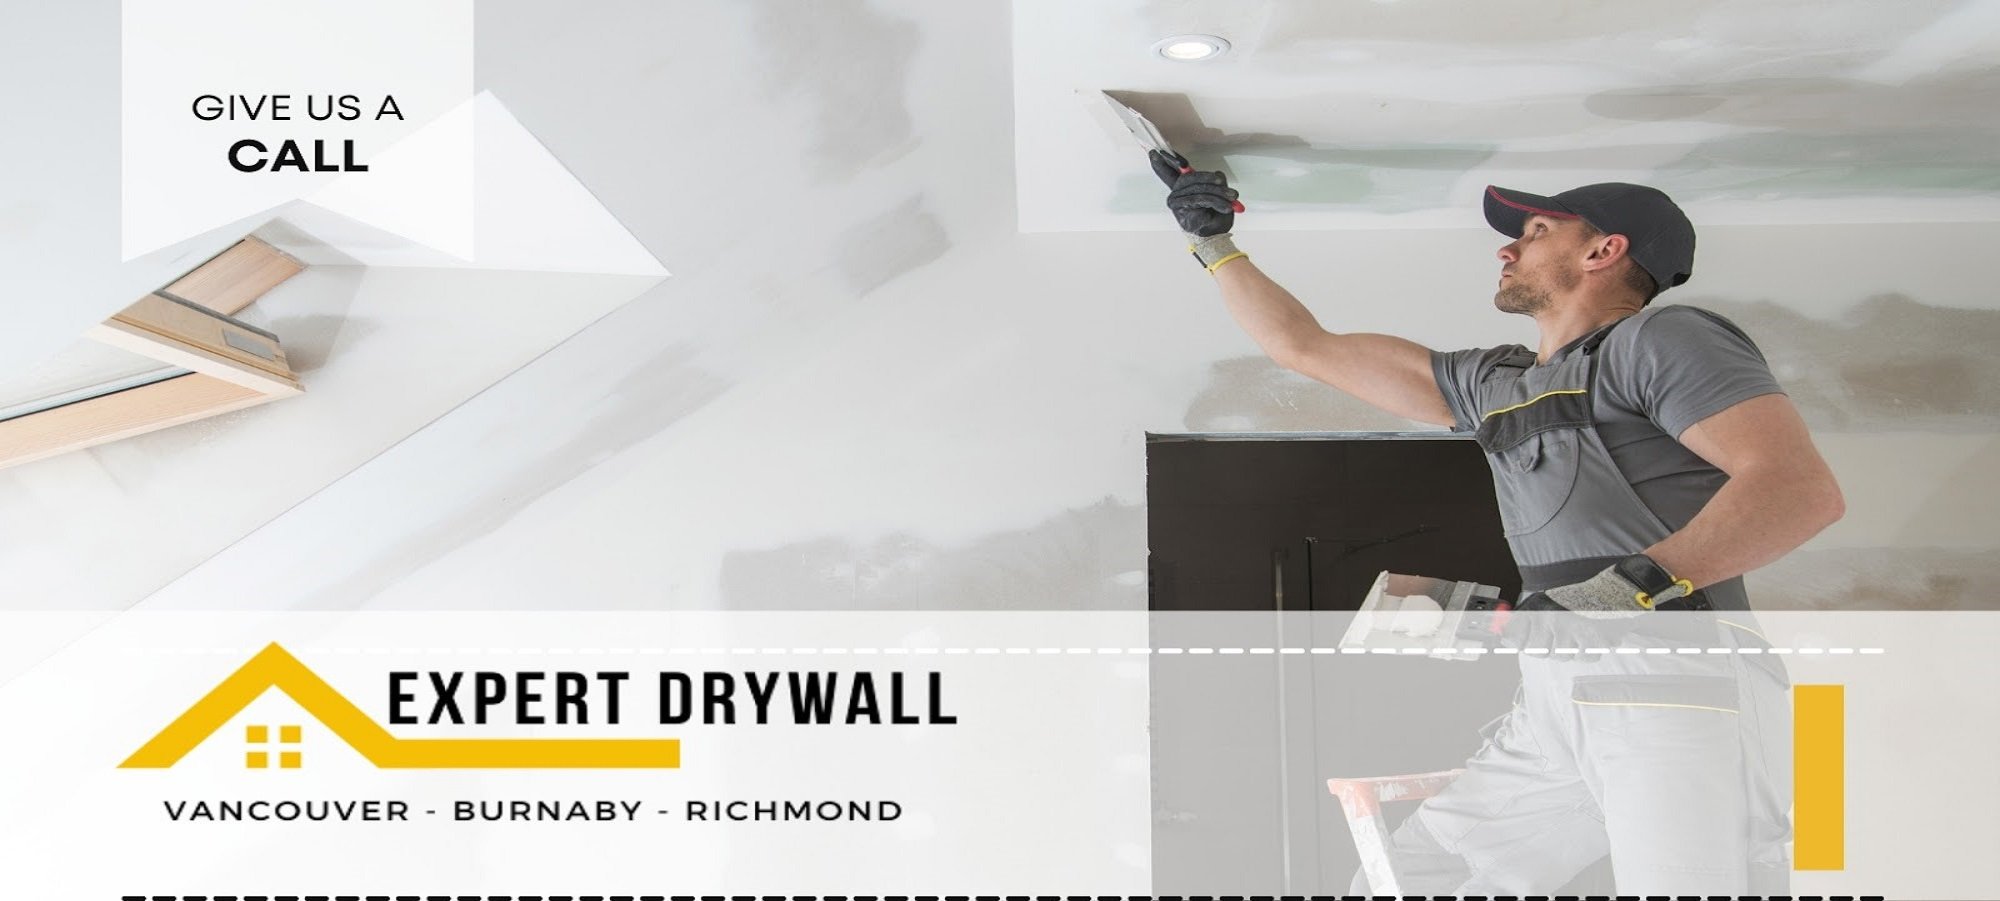 Expert Drywall Vancouver cover